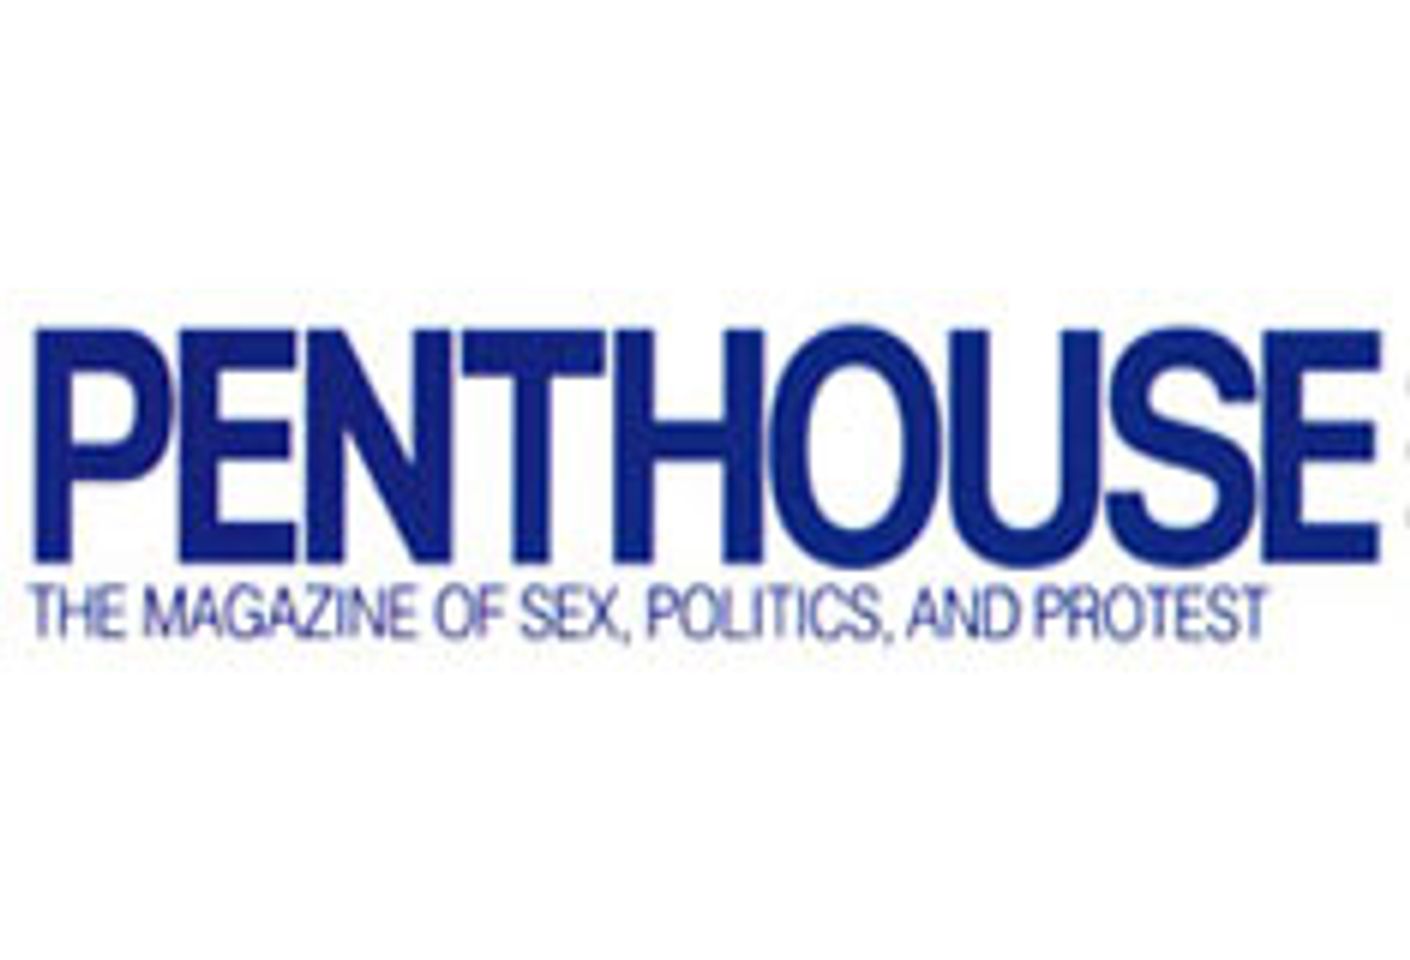 Penthouse May Emerge from Bankruptcy